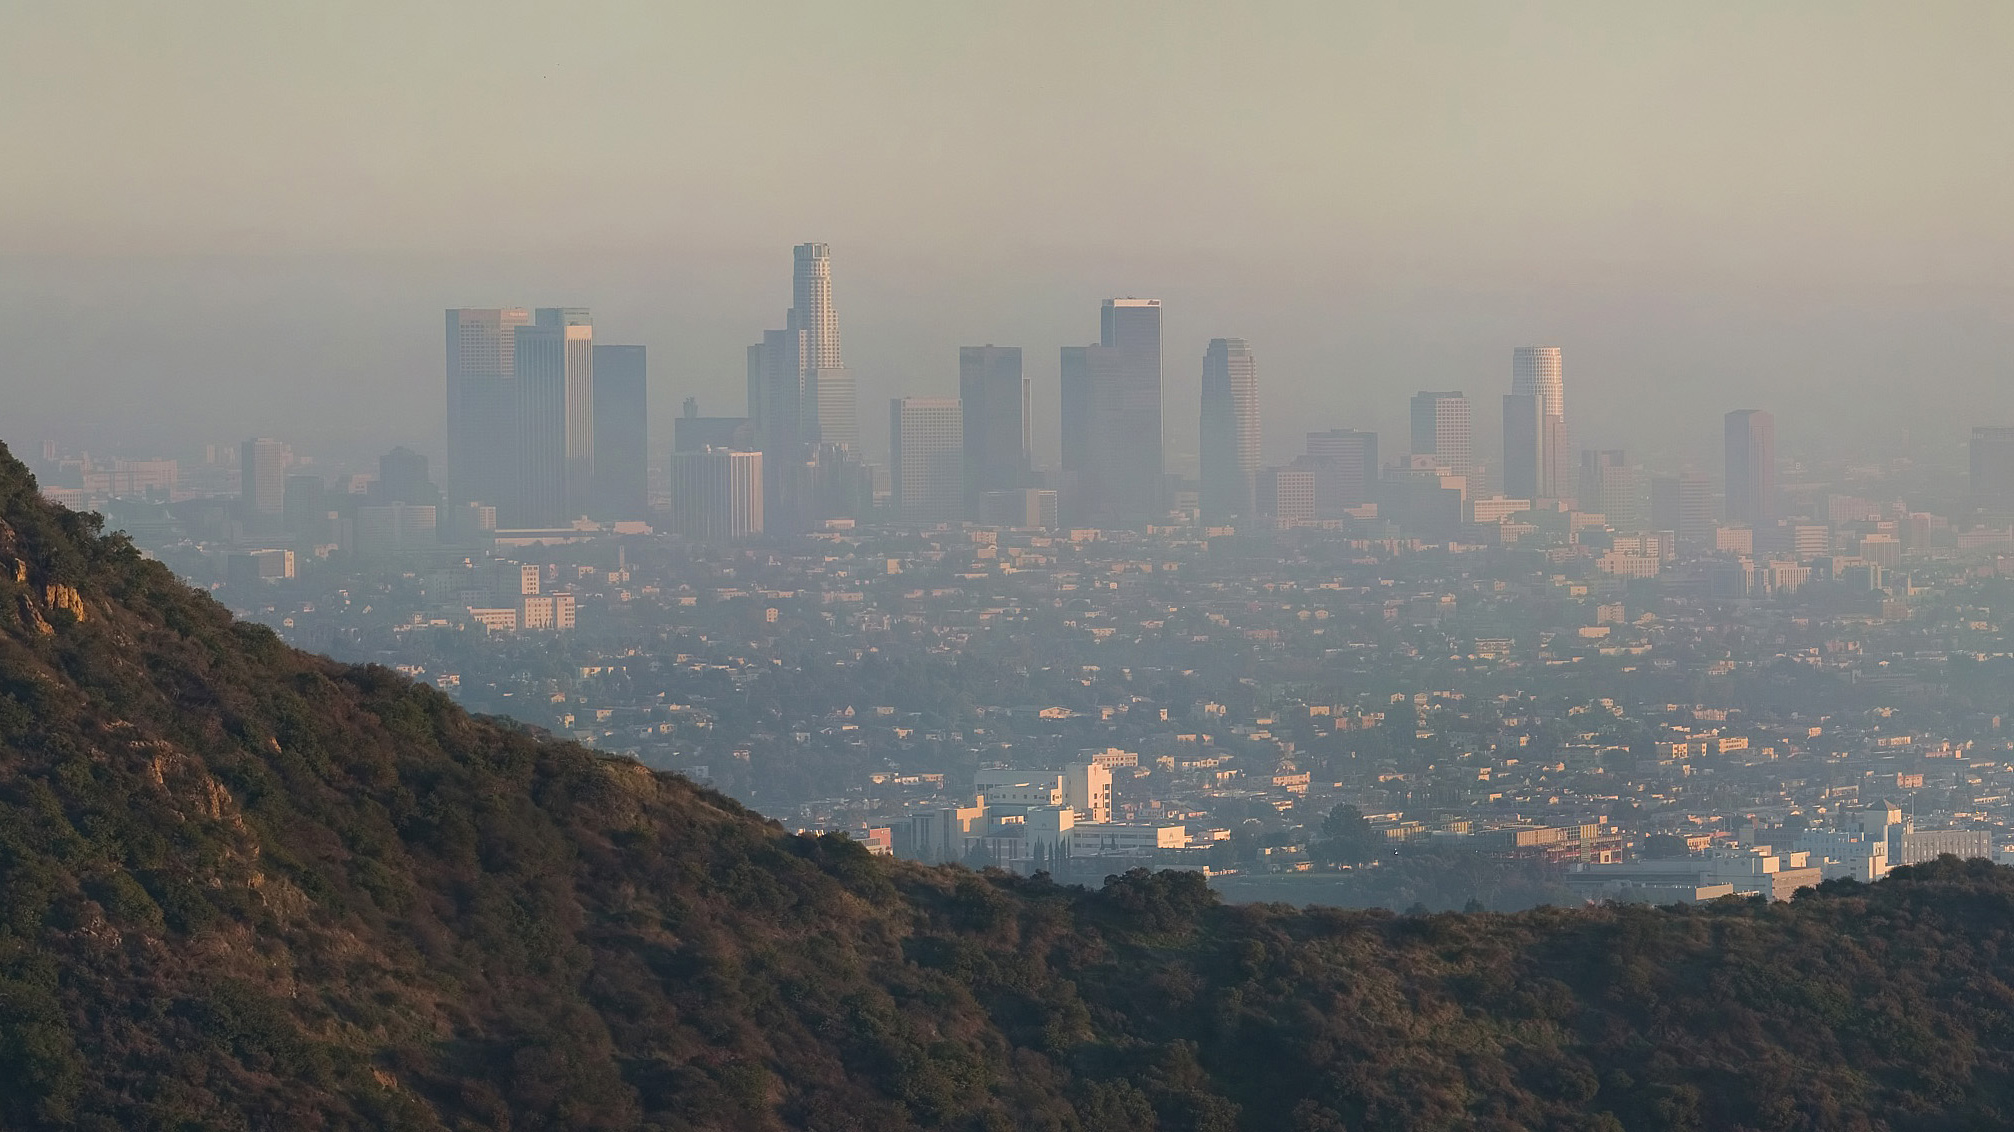 Los Angeles’s skyscrapers appear hazy in the distance due to brownish orange smog. A slope of Mount Hollywood is seen in the foreground.